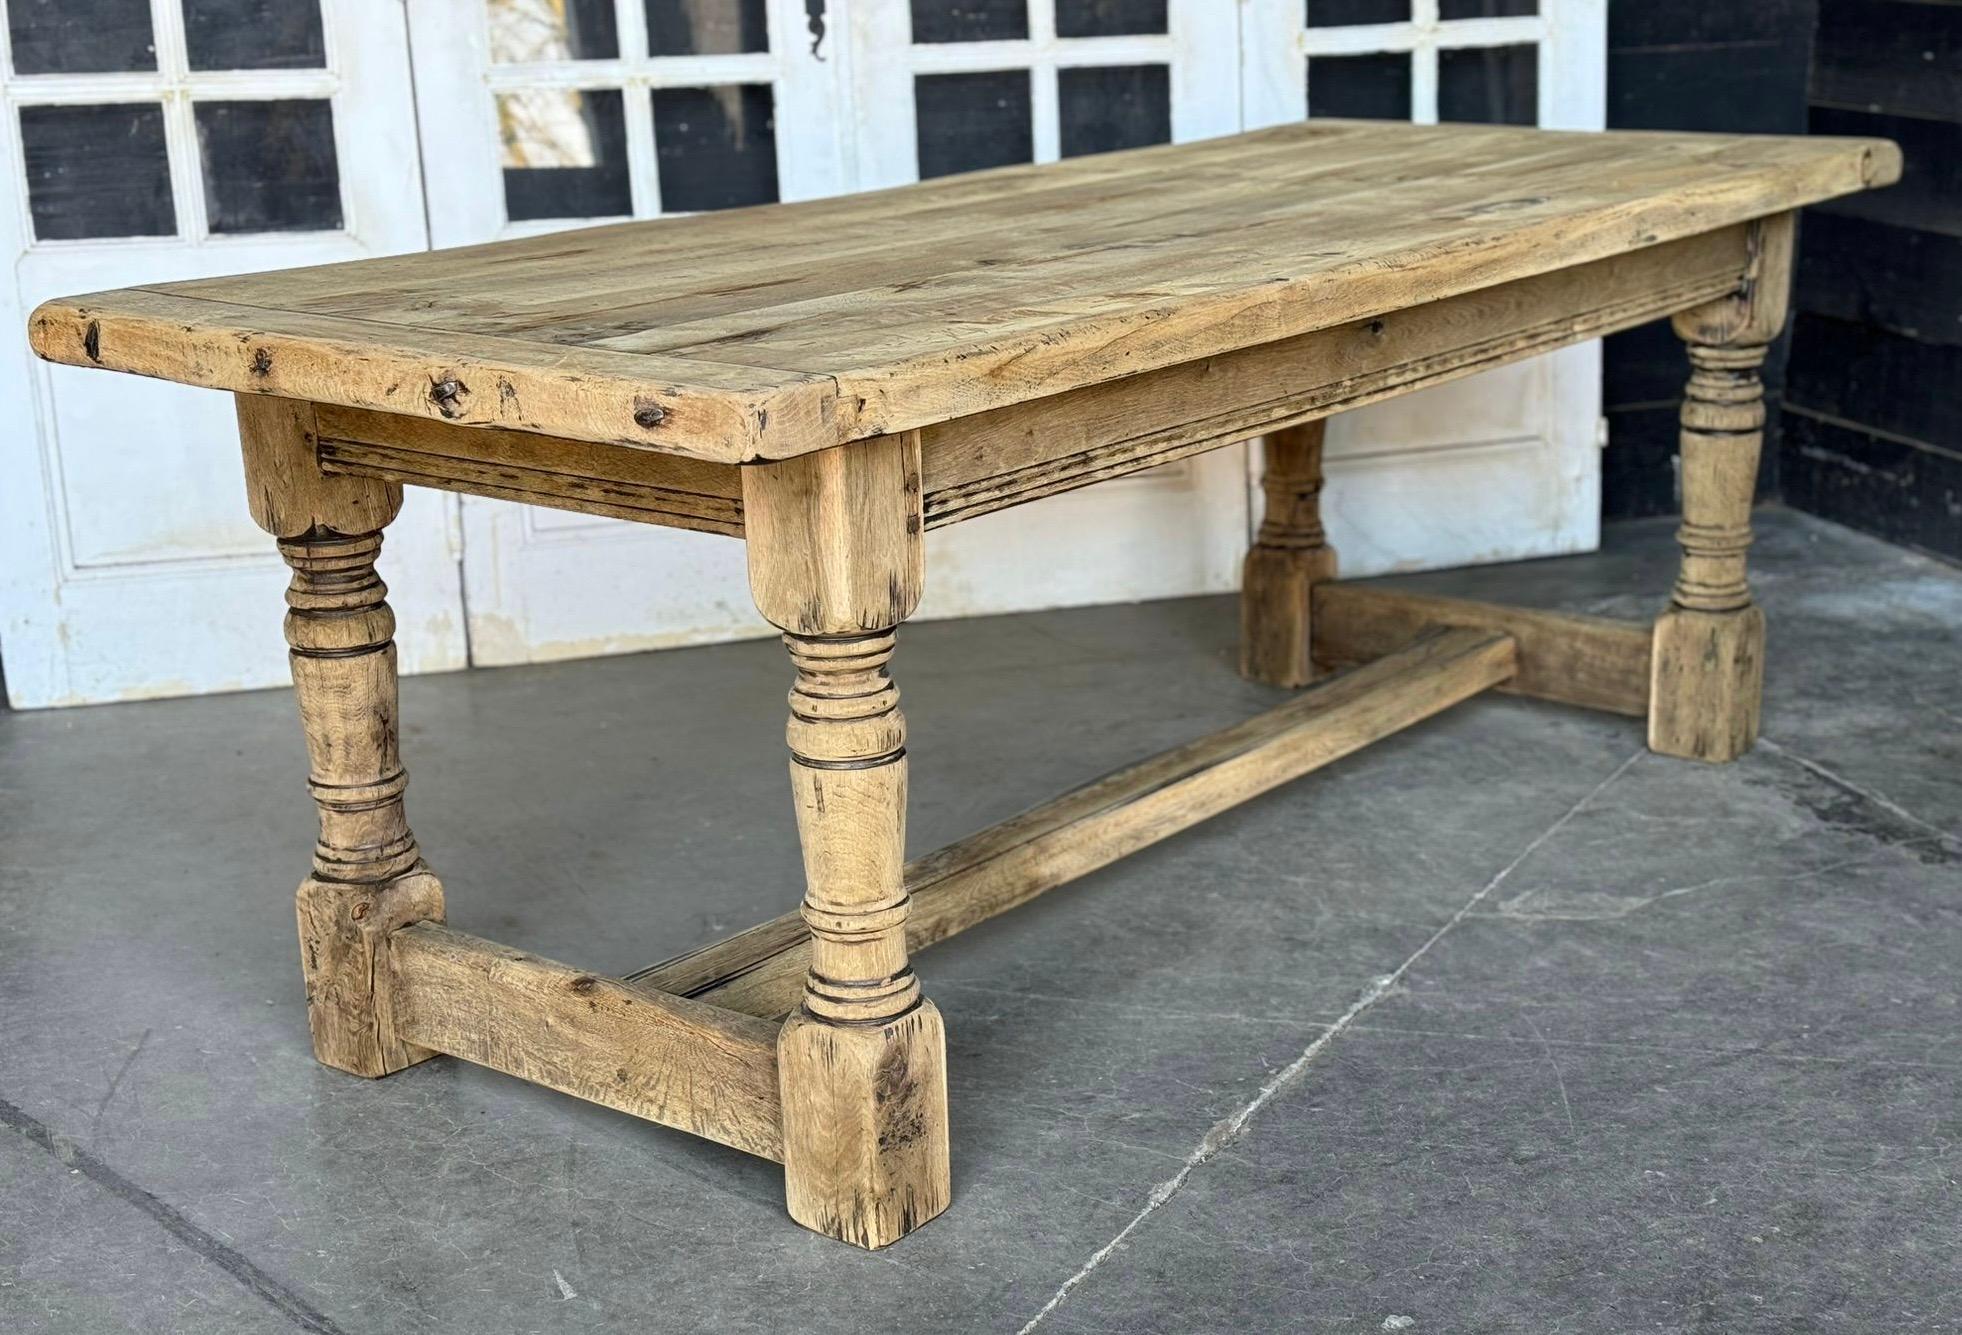 A superb quality Solid Oak Farmhouse Dining Table. Dating to early 1900s this table is of excellent construction and will be around for generations to come. Hard to find it is a good depth. We have bleached it for a lighter look and to bring out the